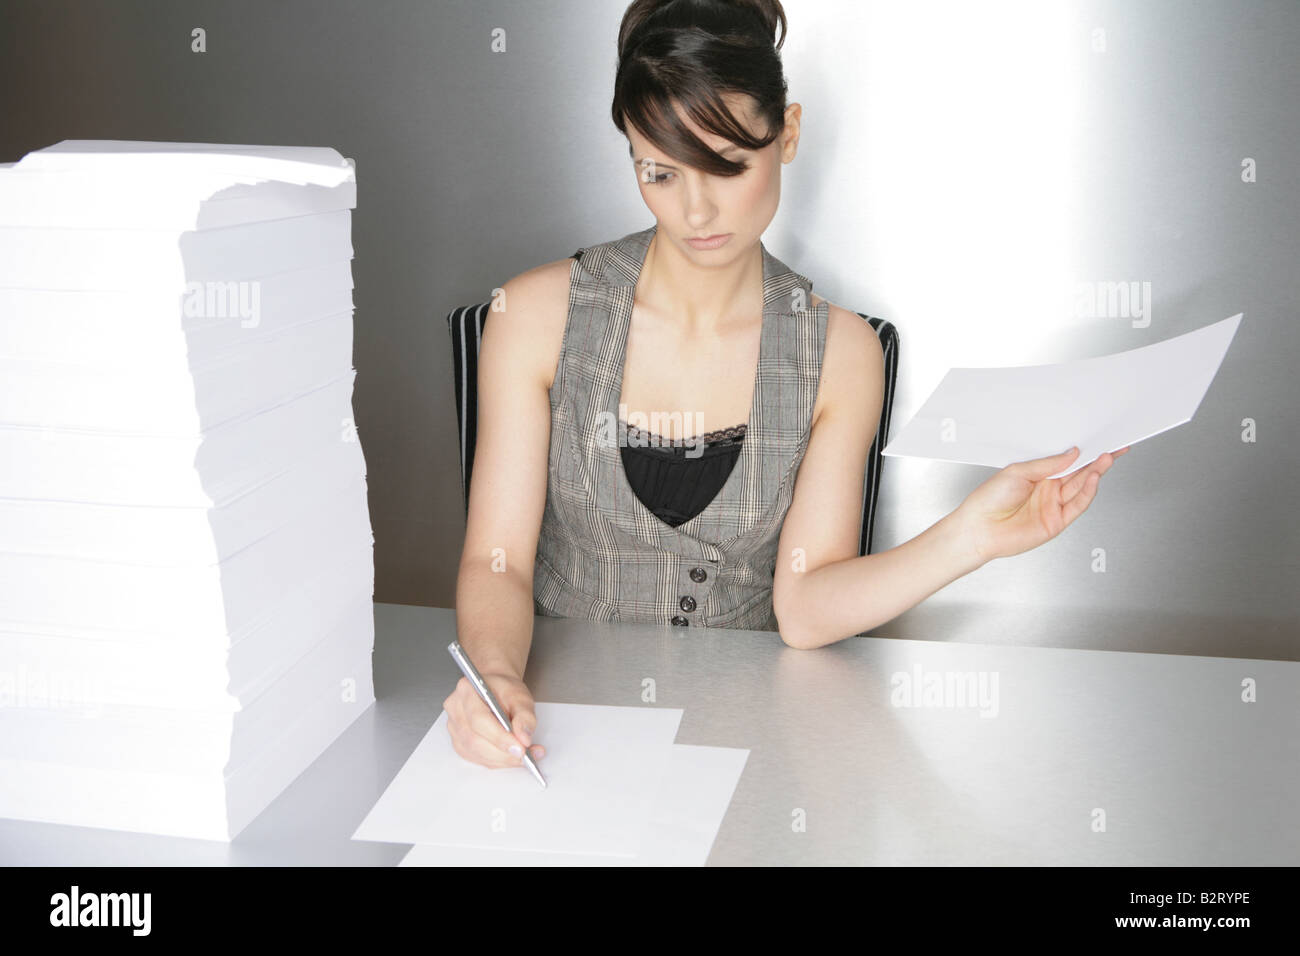 Businesswoman aged 24 taking notes on a silver desktop Stock Photo